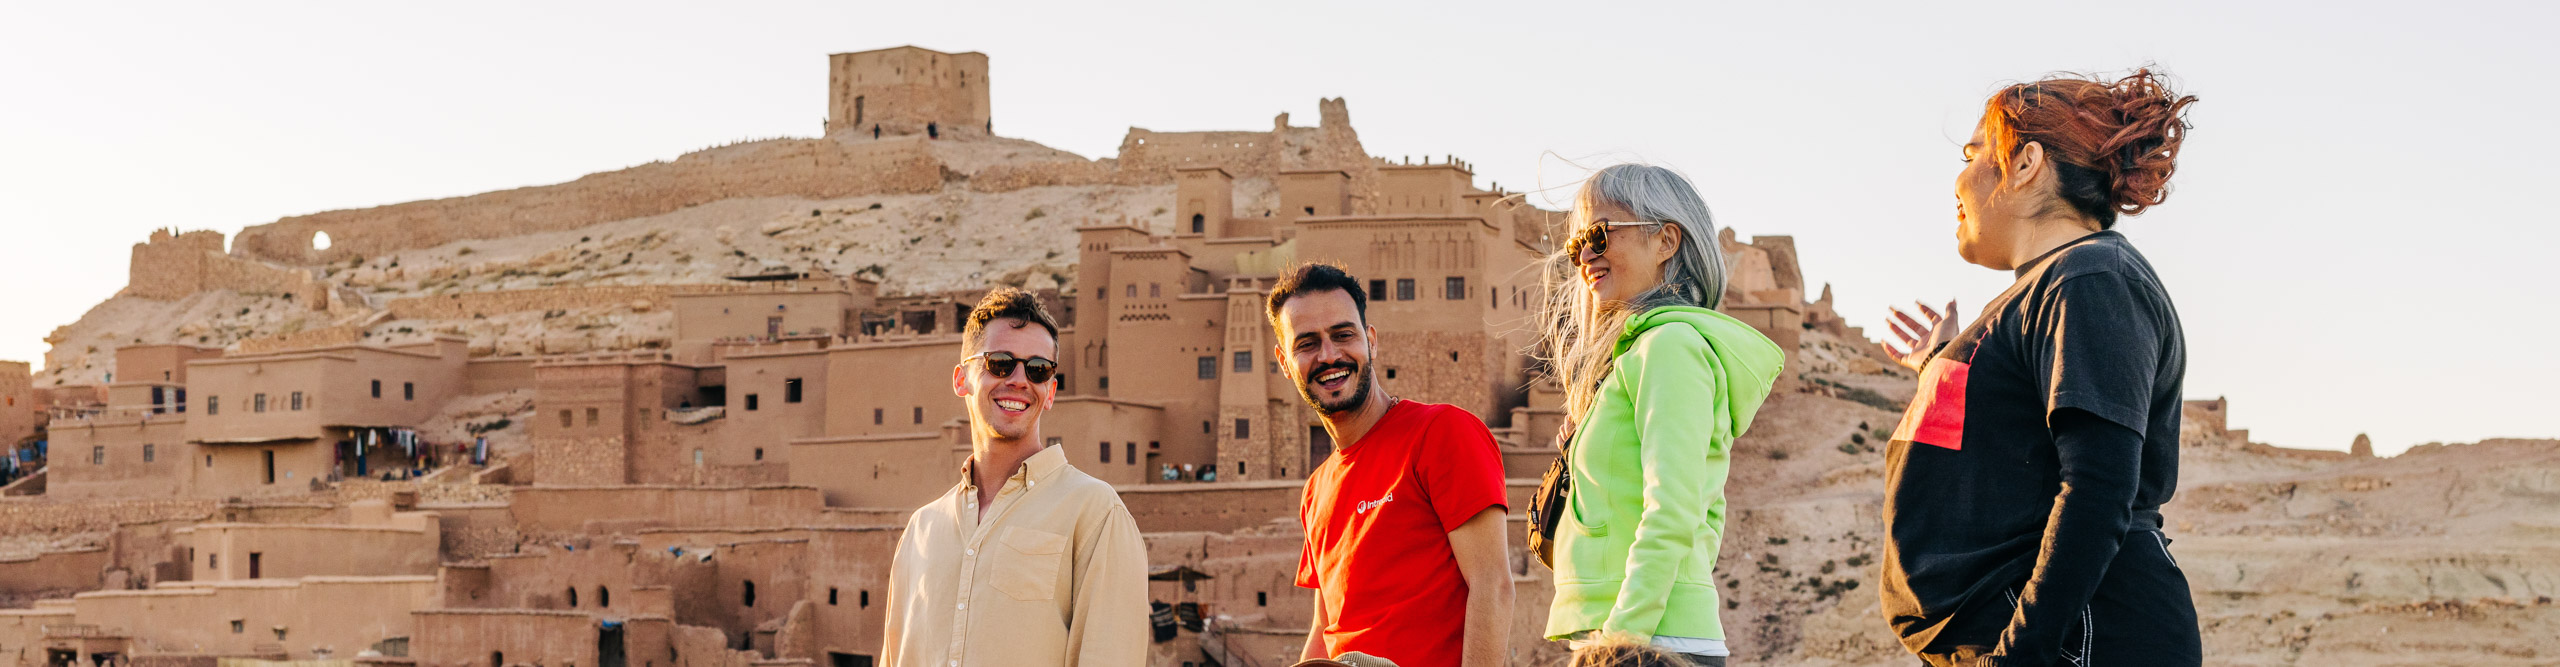 People standing and laughing at the top of a hill overlooking an ancient town in Morocco